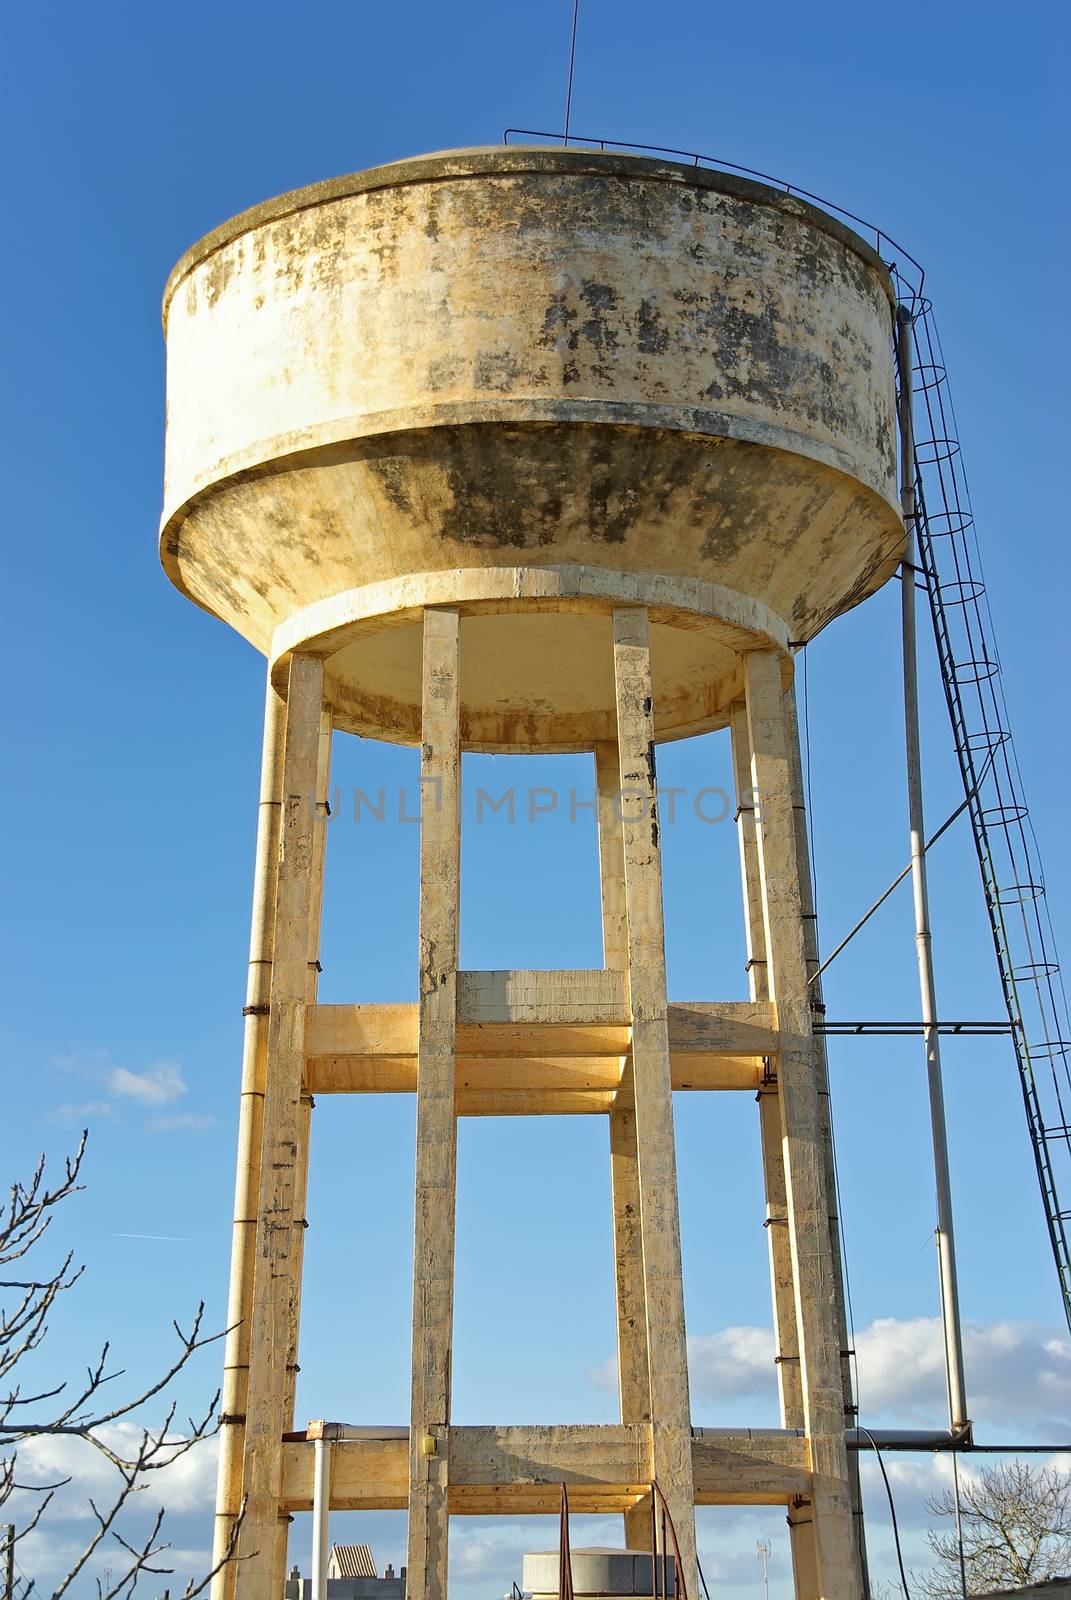 Big emergency water tank elevated over a mortar structure